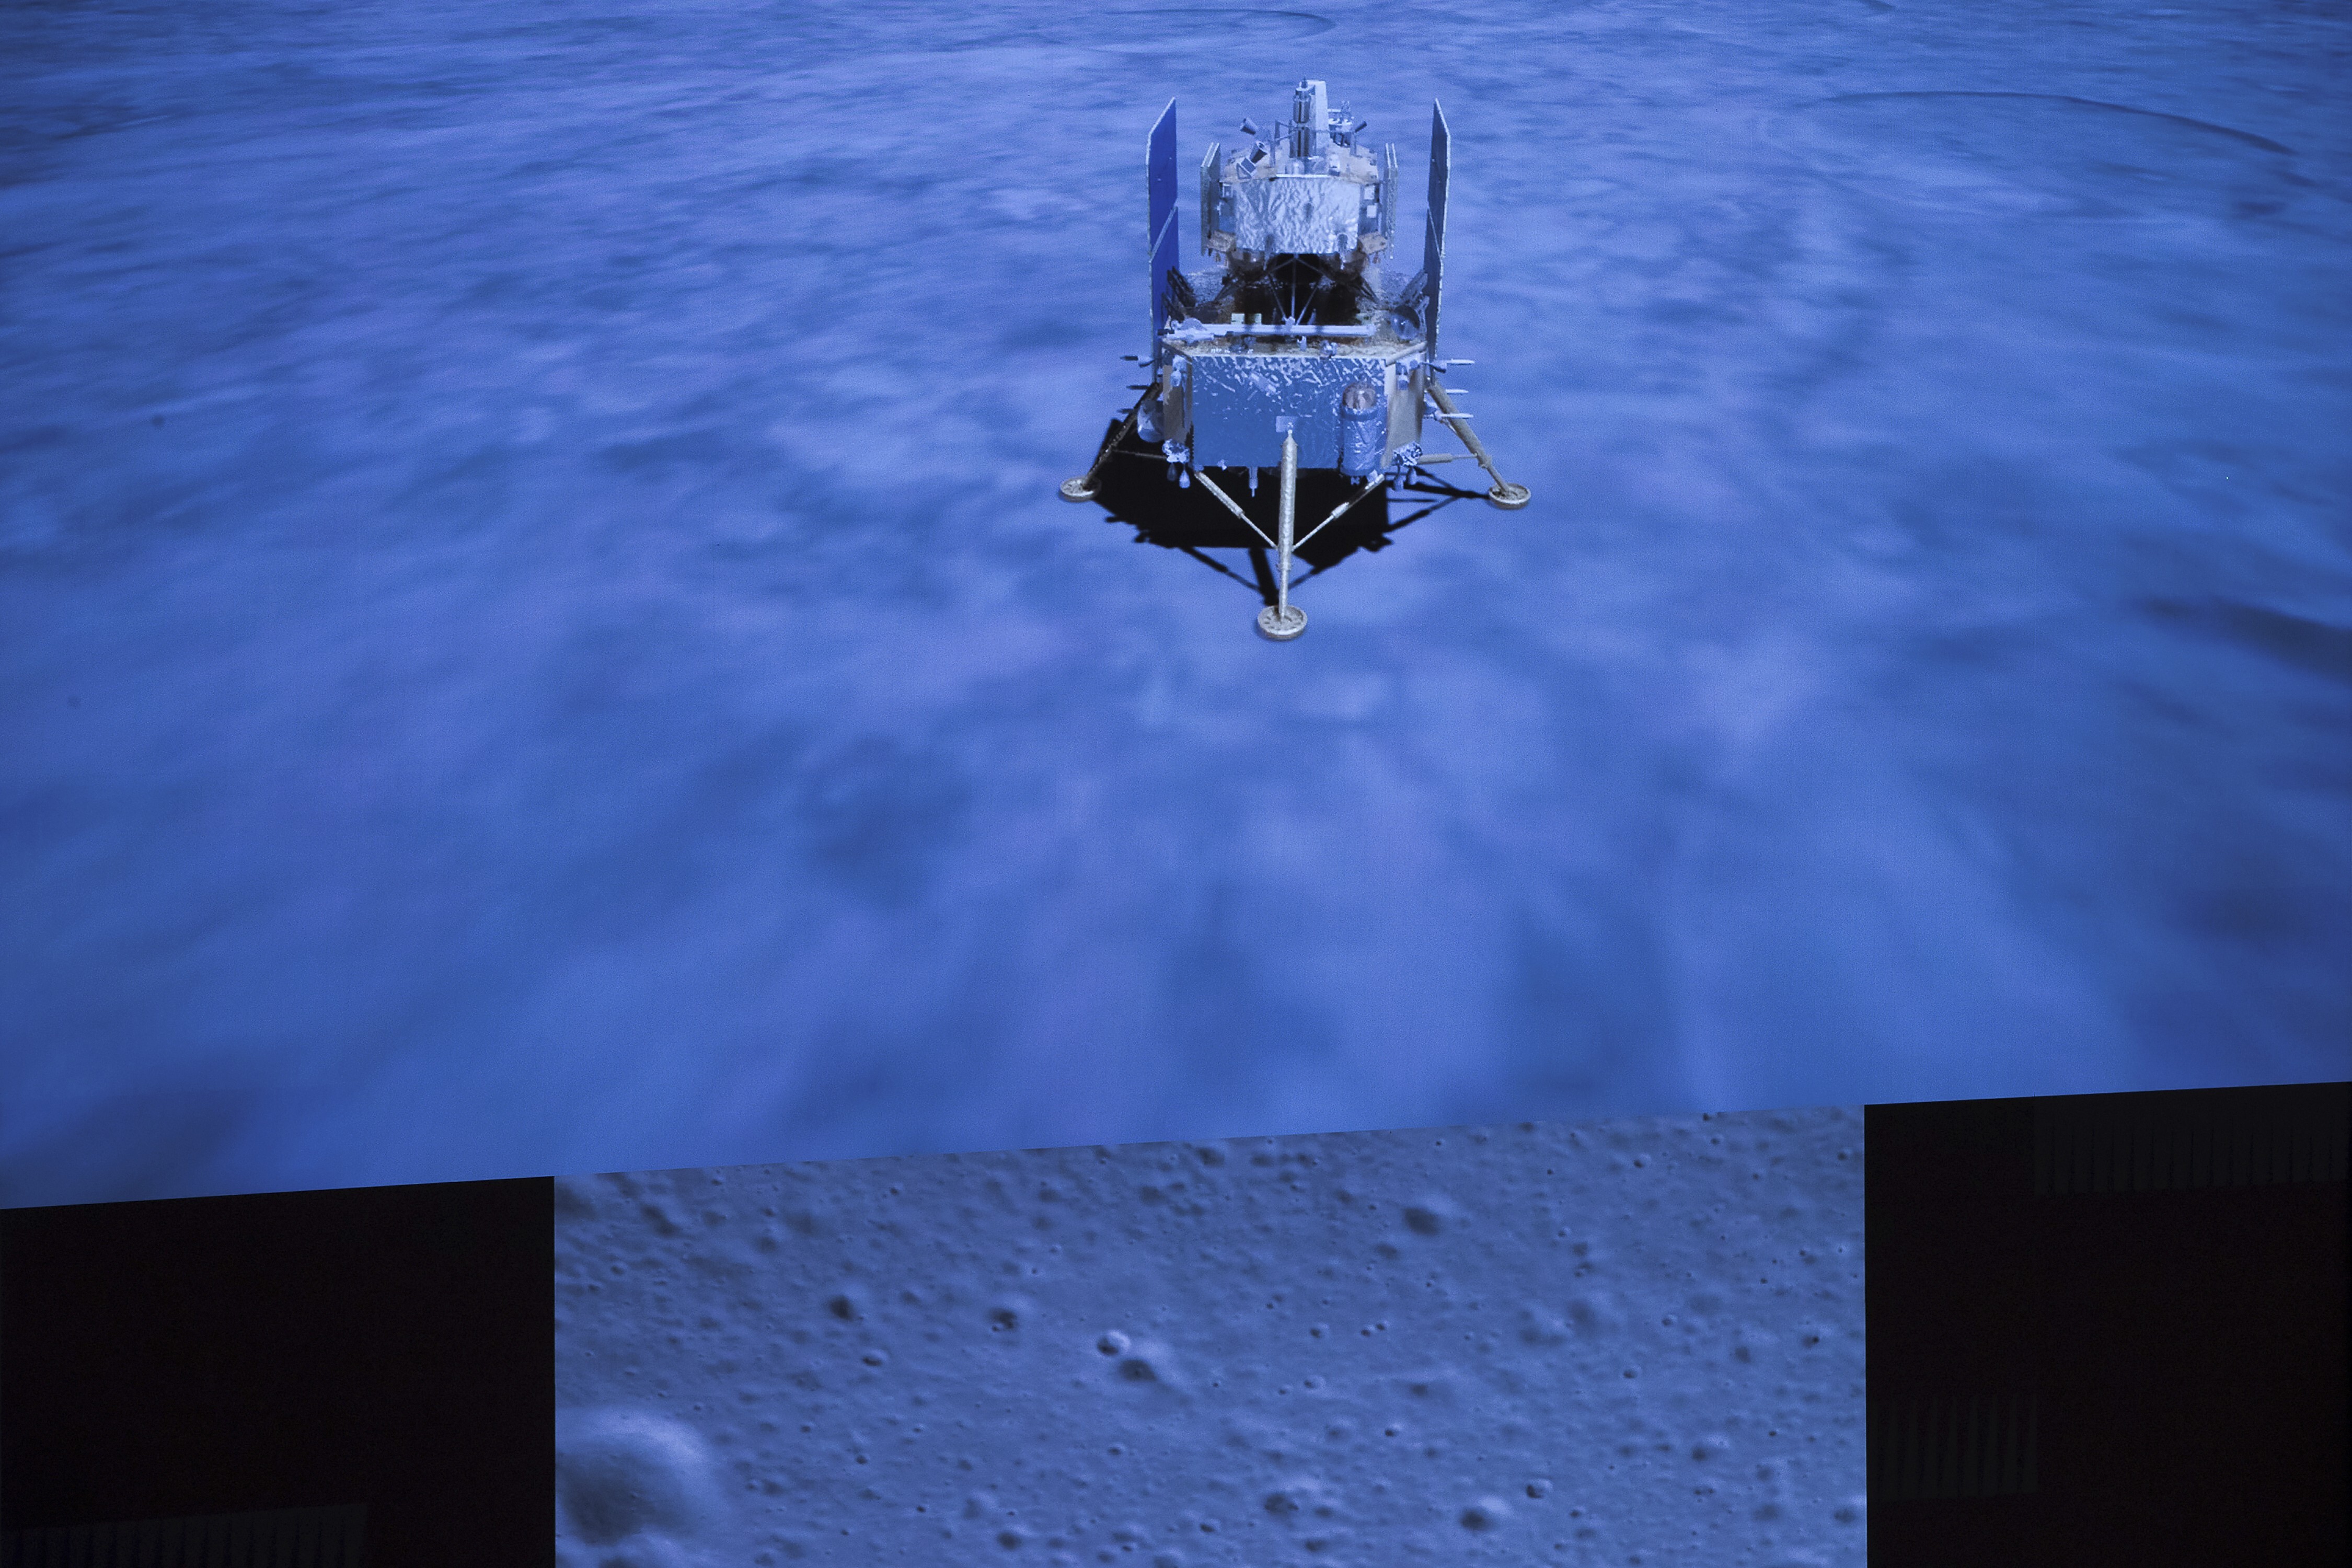 The orbiter separated from the Chang’e-5 capsule that carried lunar samples back to Earth last month. Photo: AP